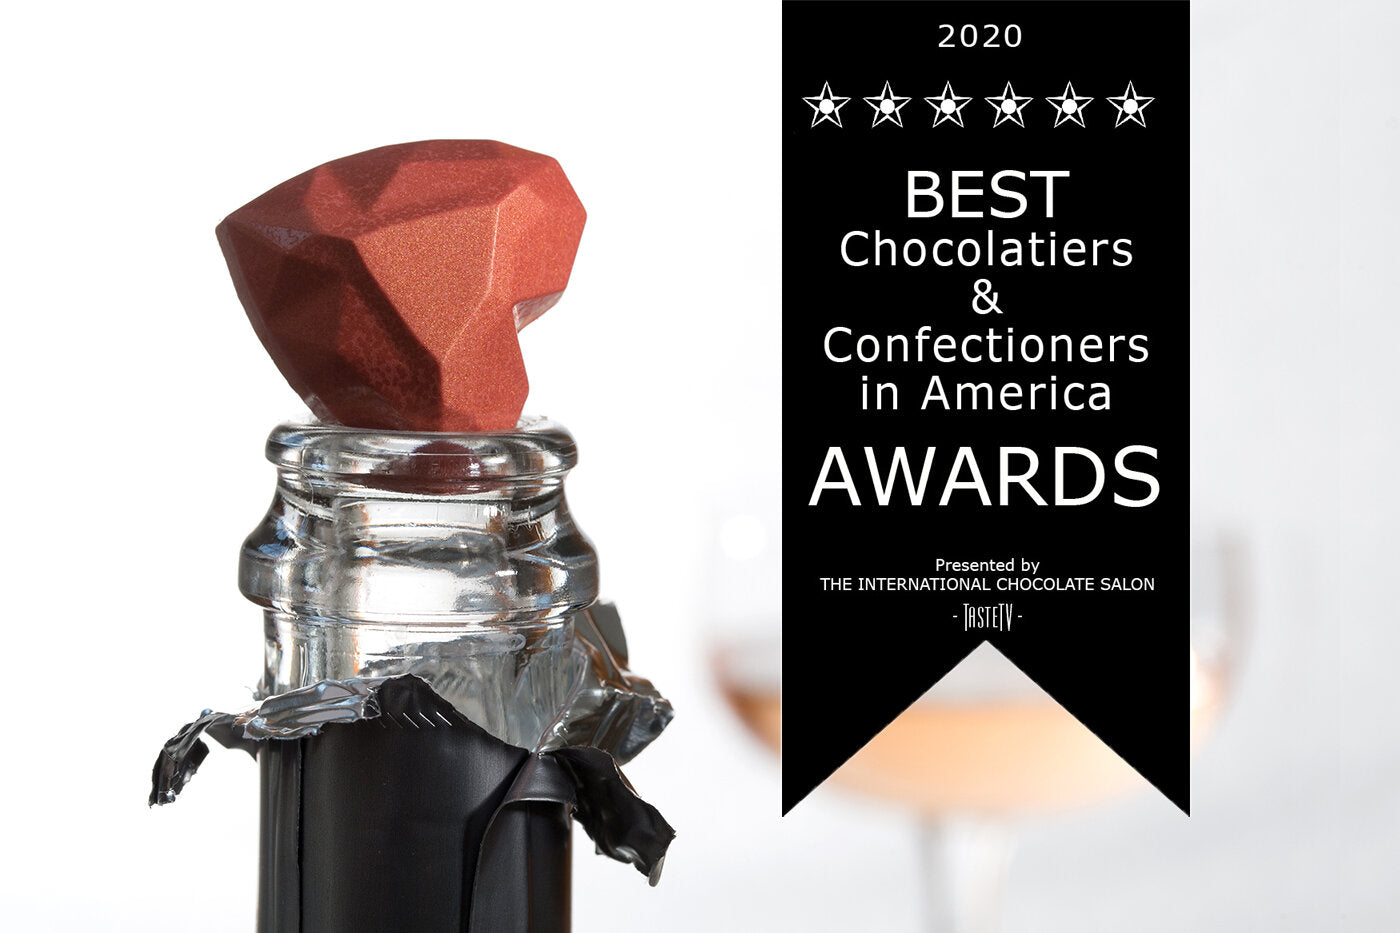 The Best Chocolatiers & Confectioners in America 2020